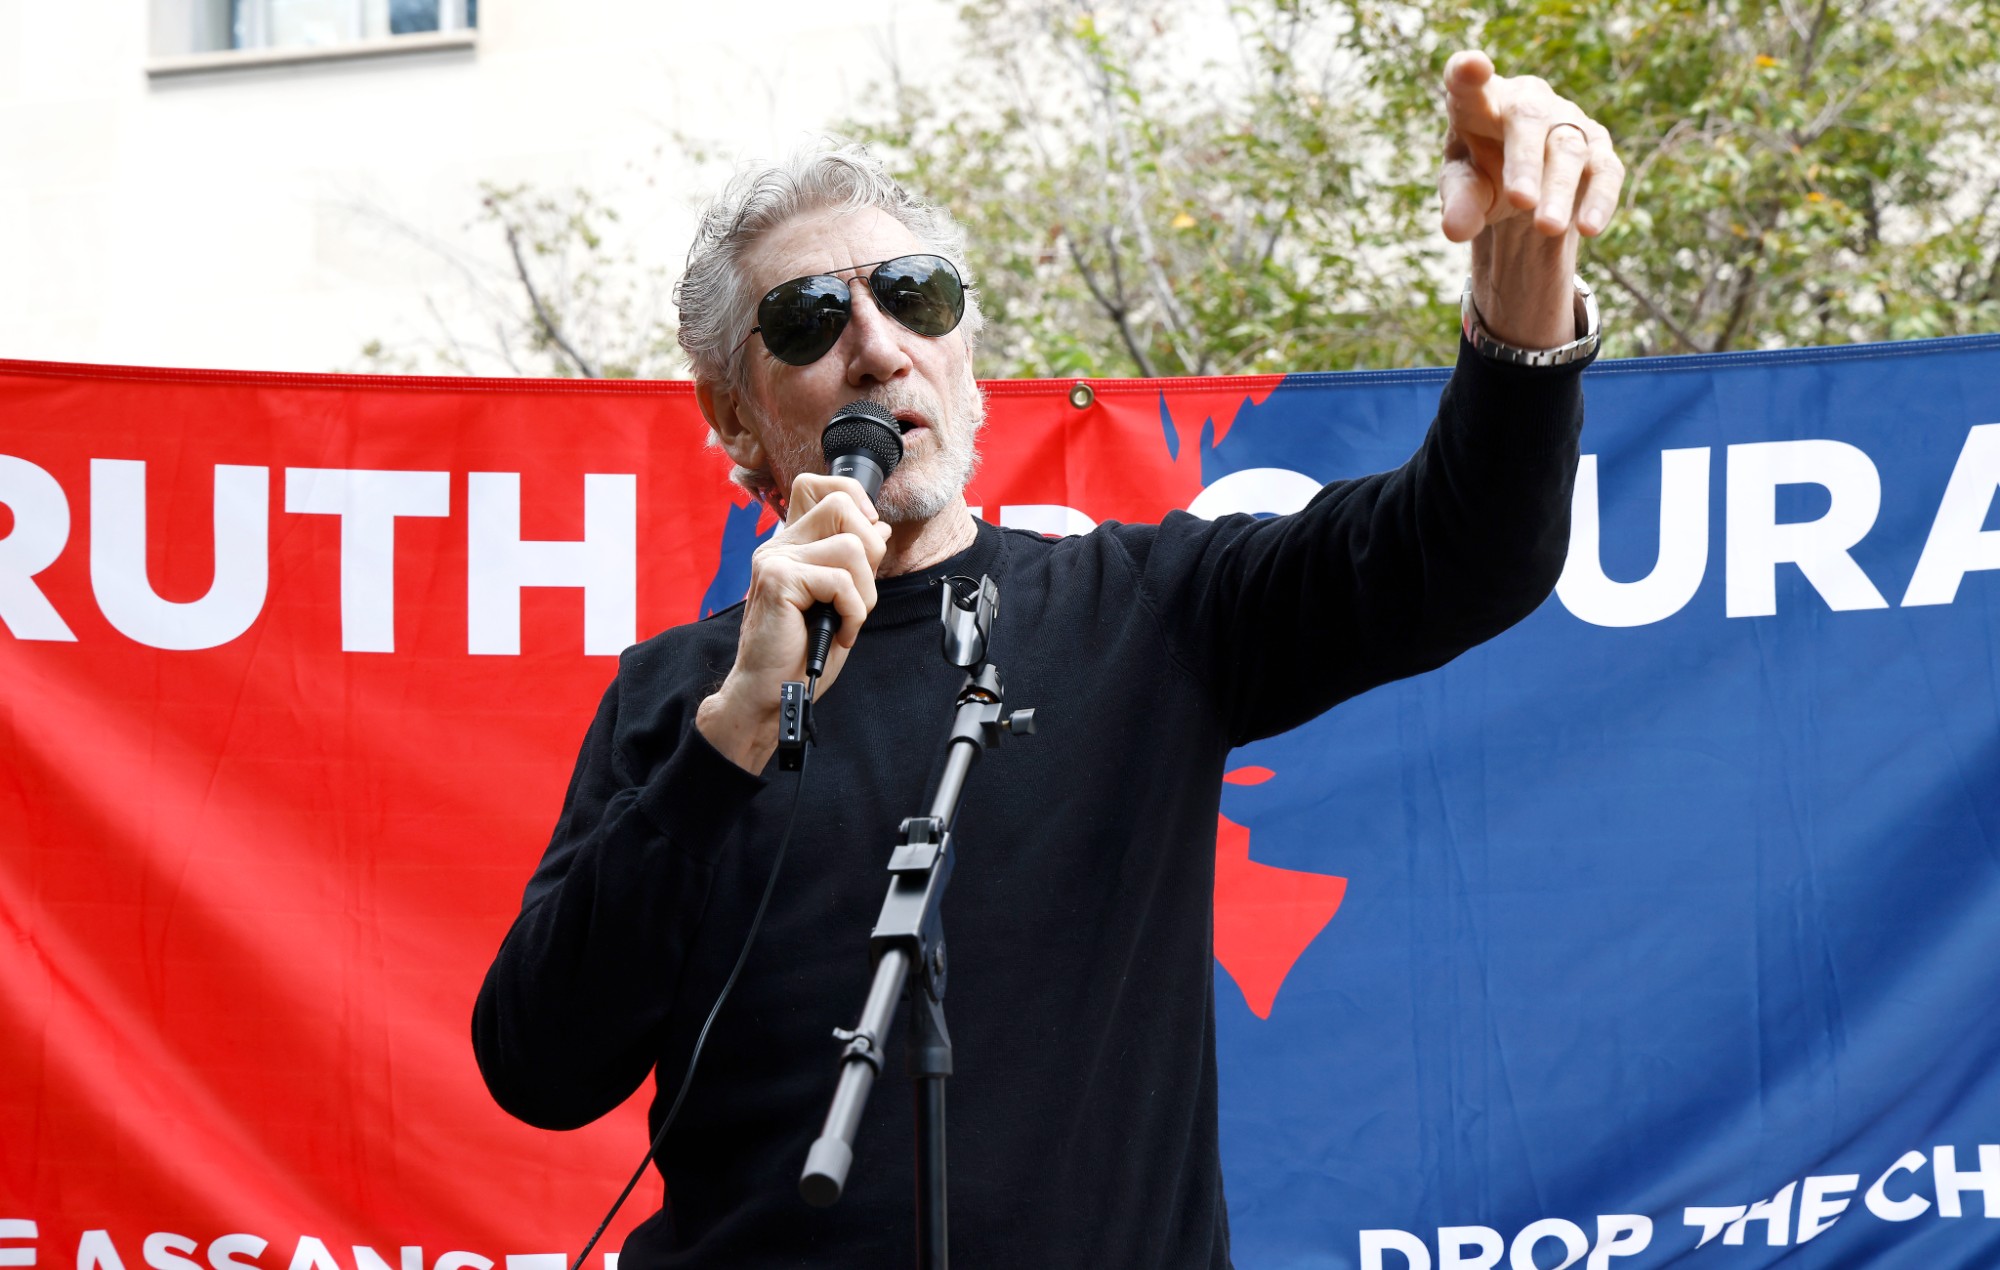 Russia asks Pink Floyd co-founder Roger Waters to speak about Ukraine at the United Nations